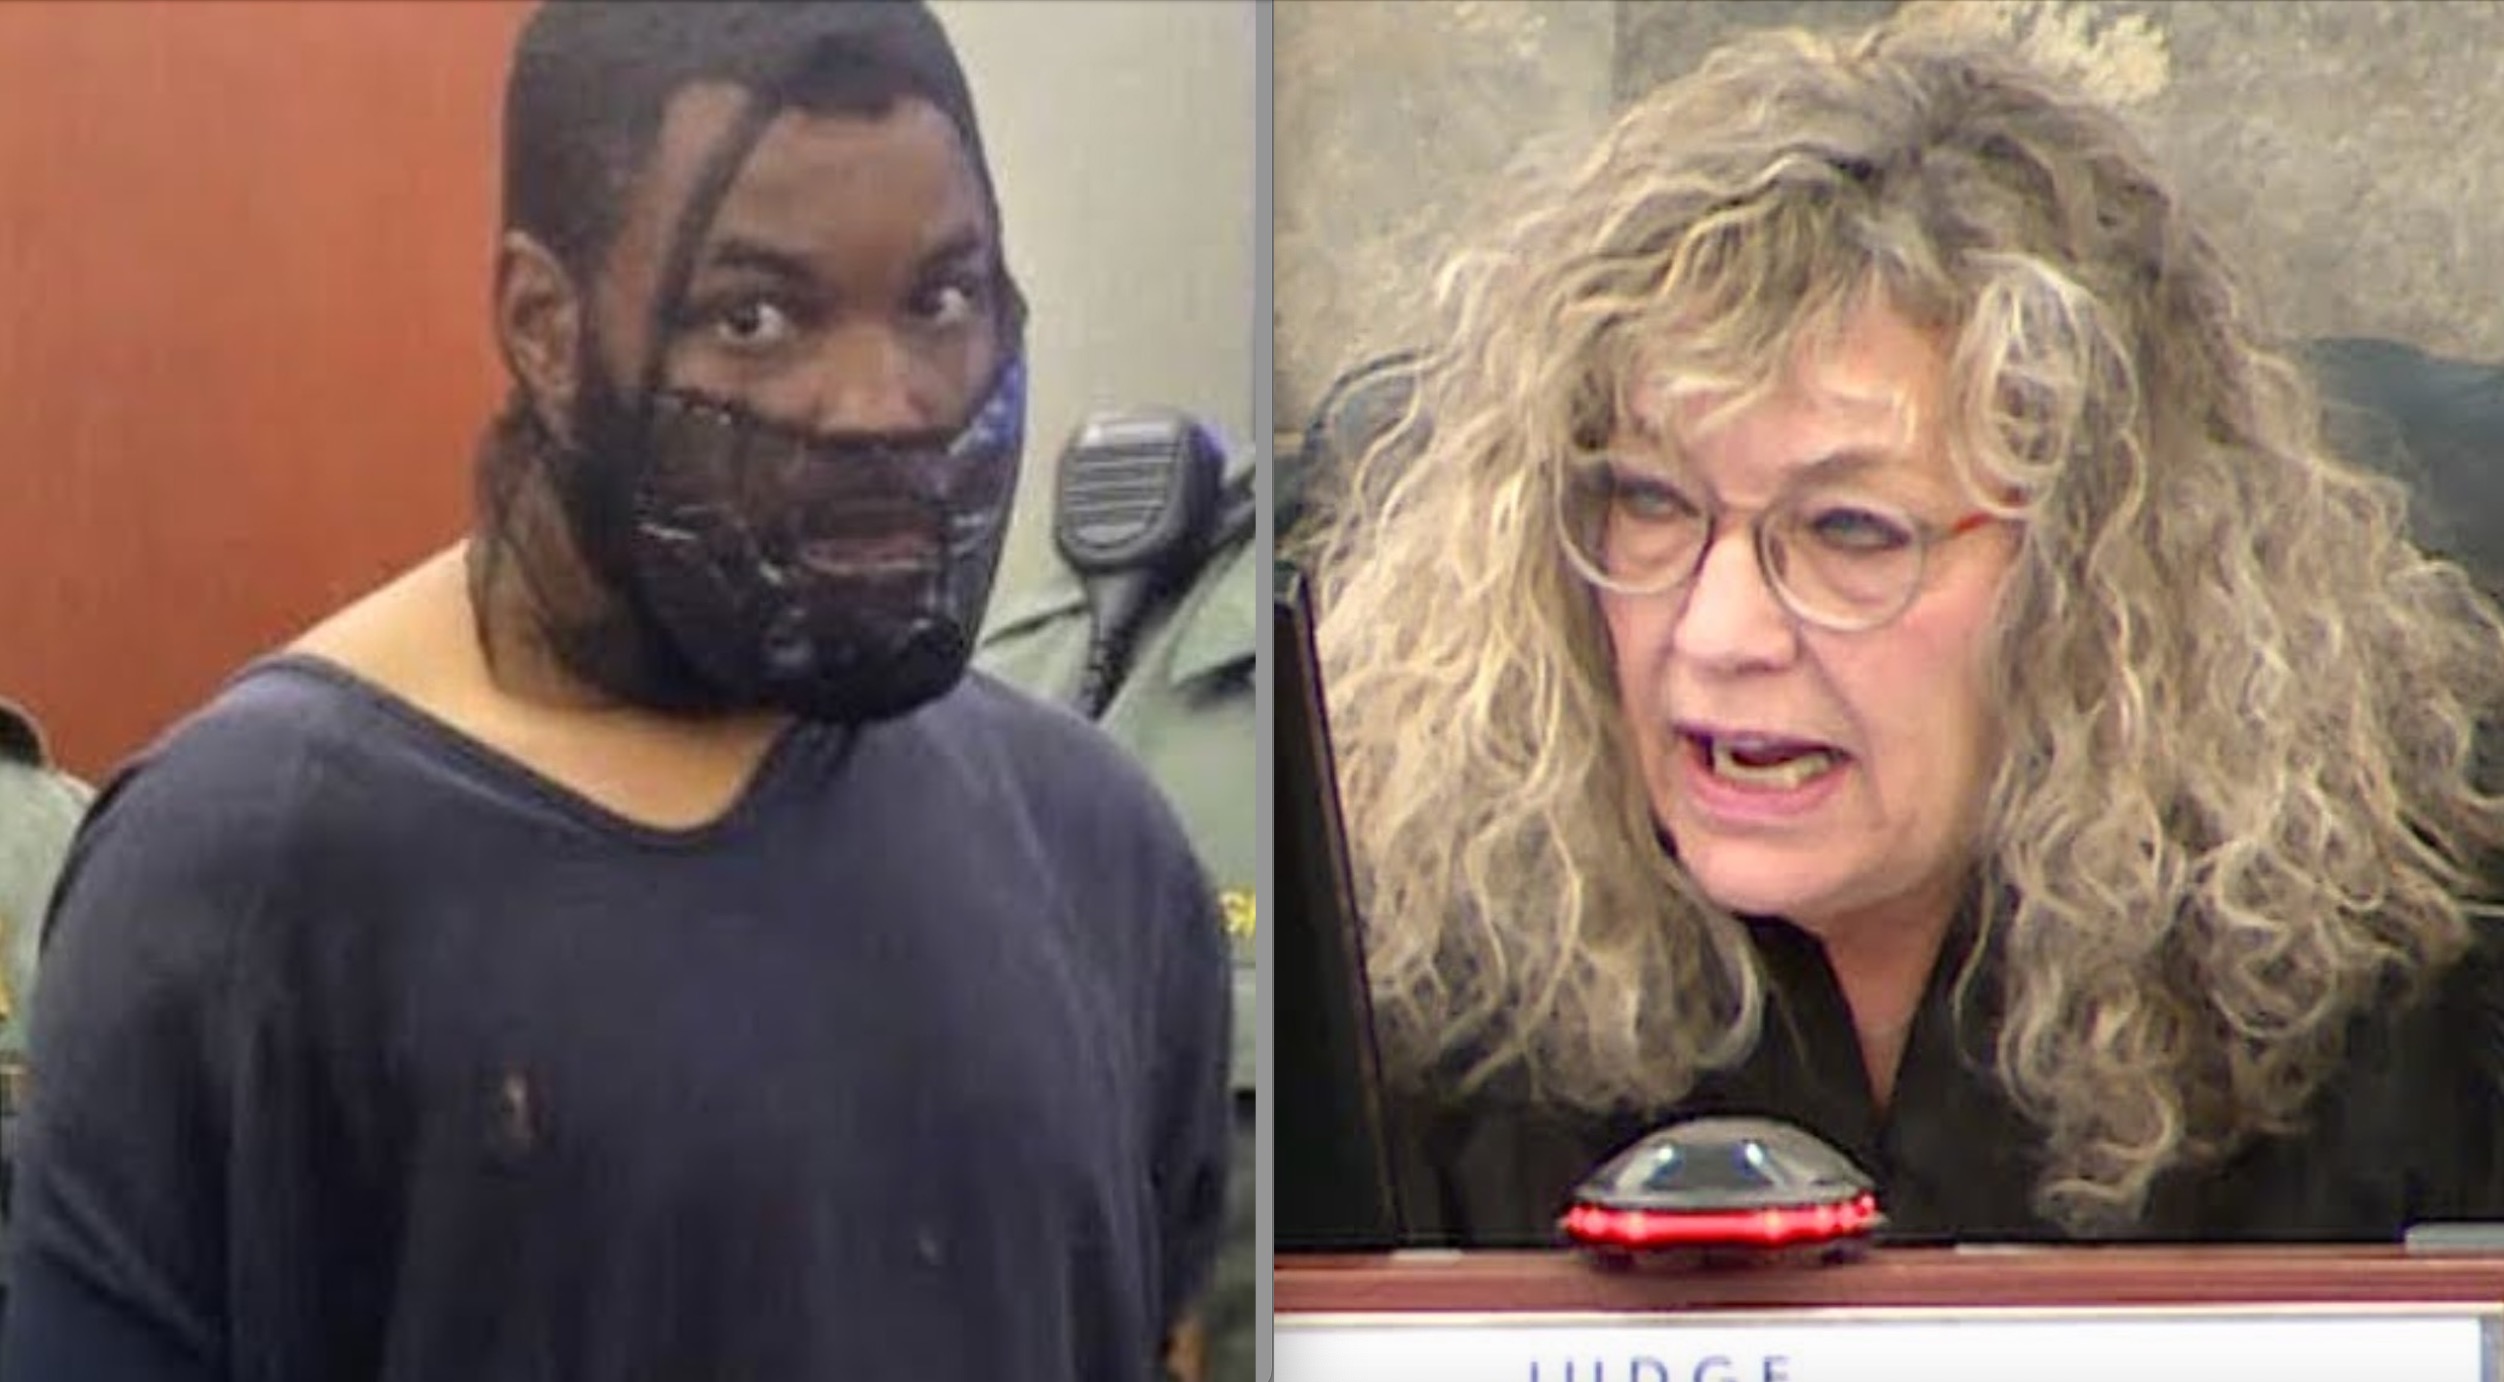 Man Who Attacked Judge in Court Returns Wearing a Facemask to Be Sentenced by Same Judge - Watch Video